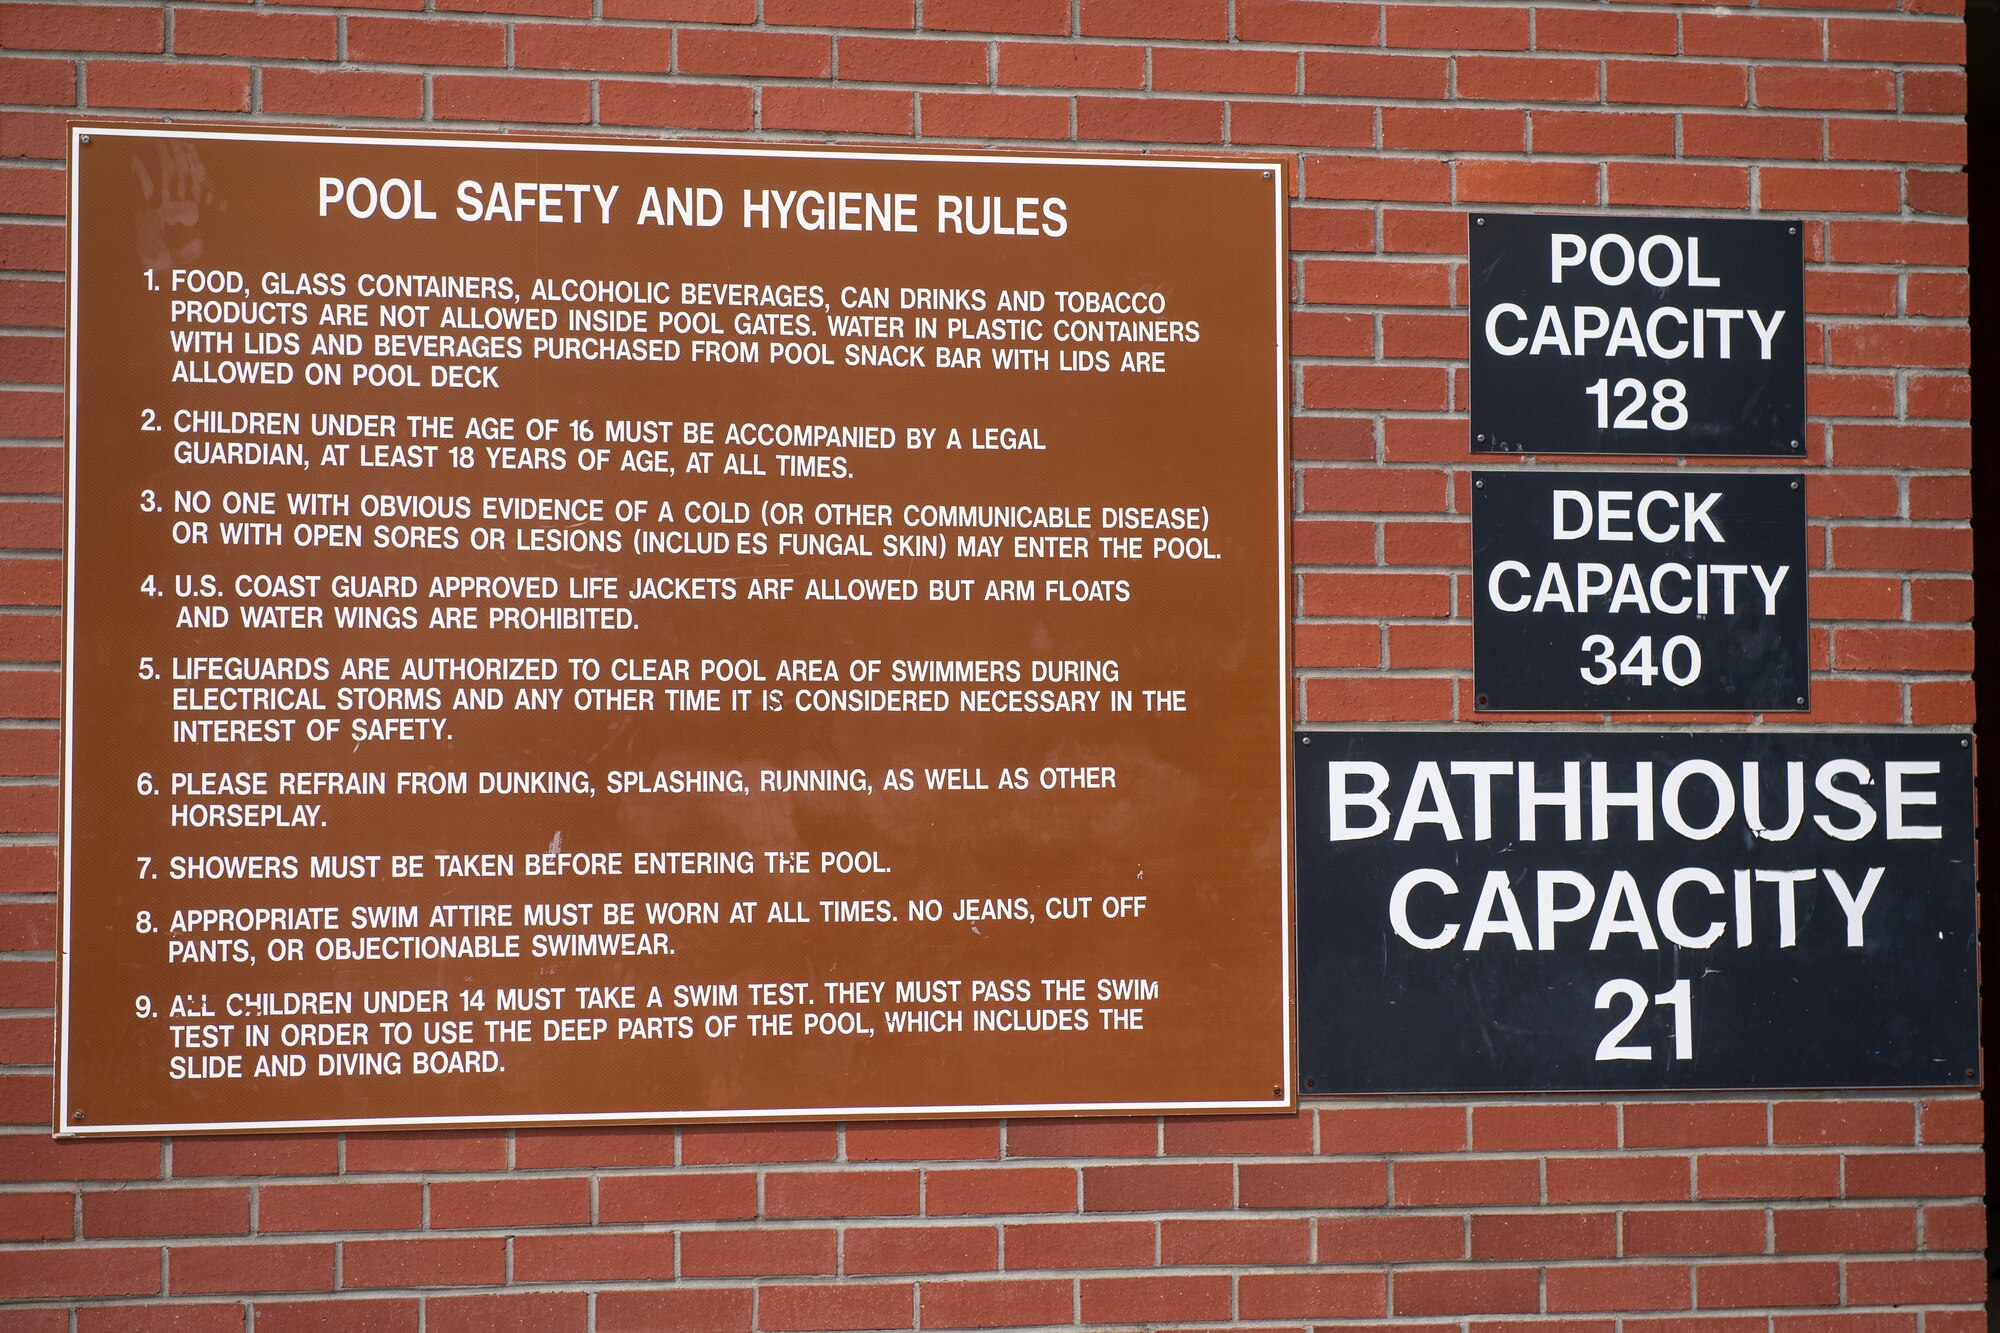 Pool safety rules